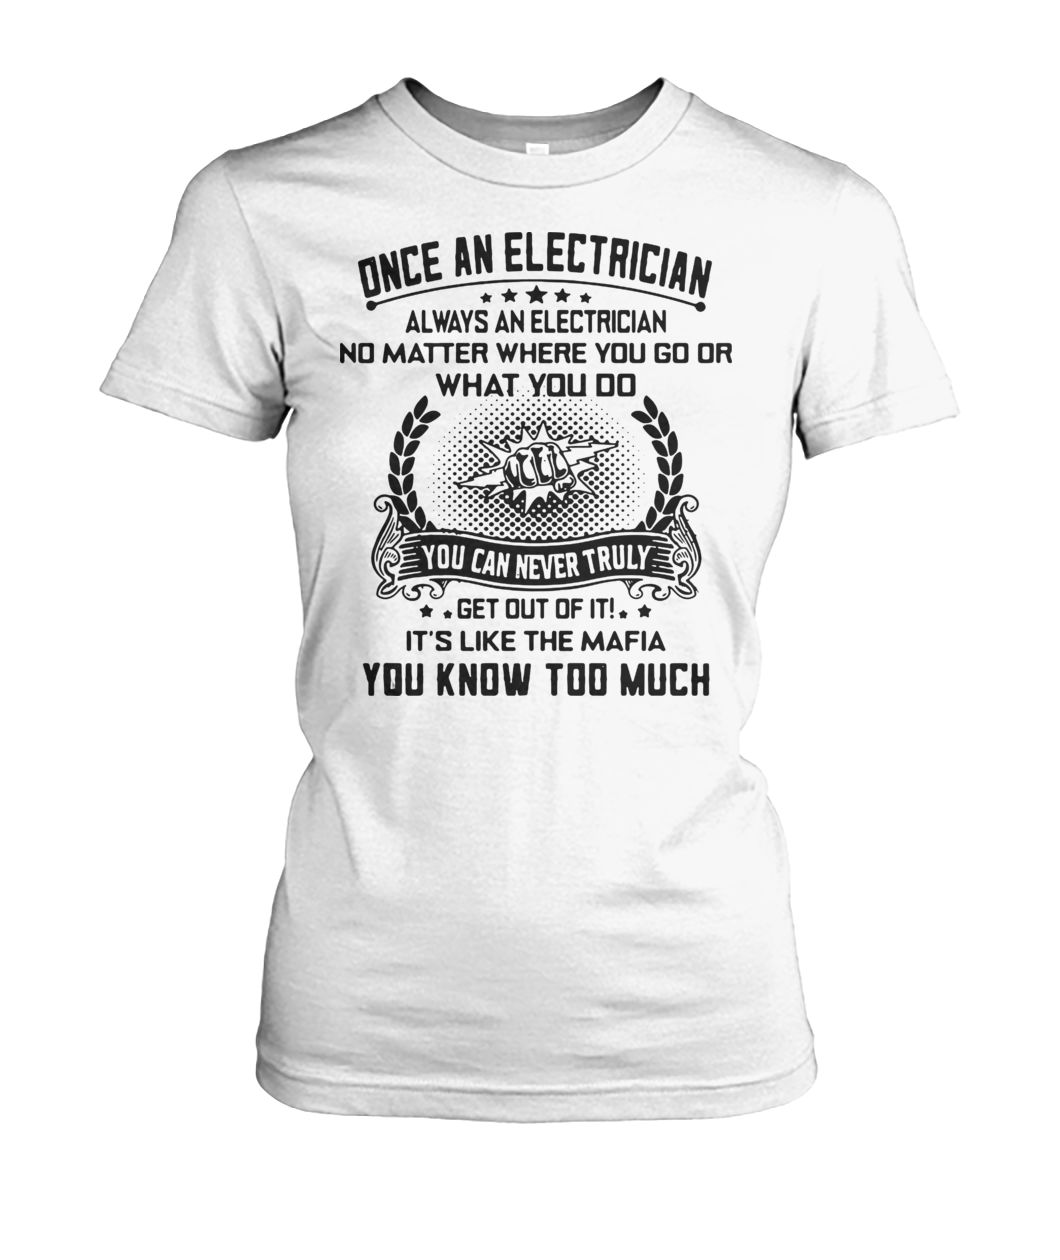 Once an electrician always an electrician no matter where you go women's crew tee